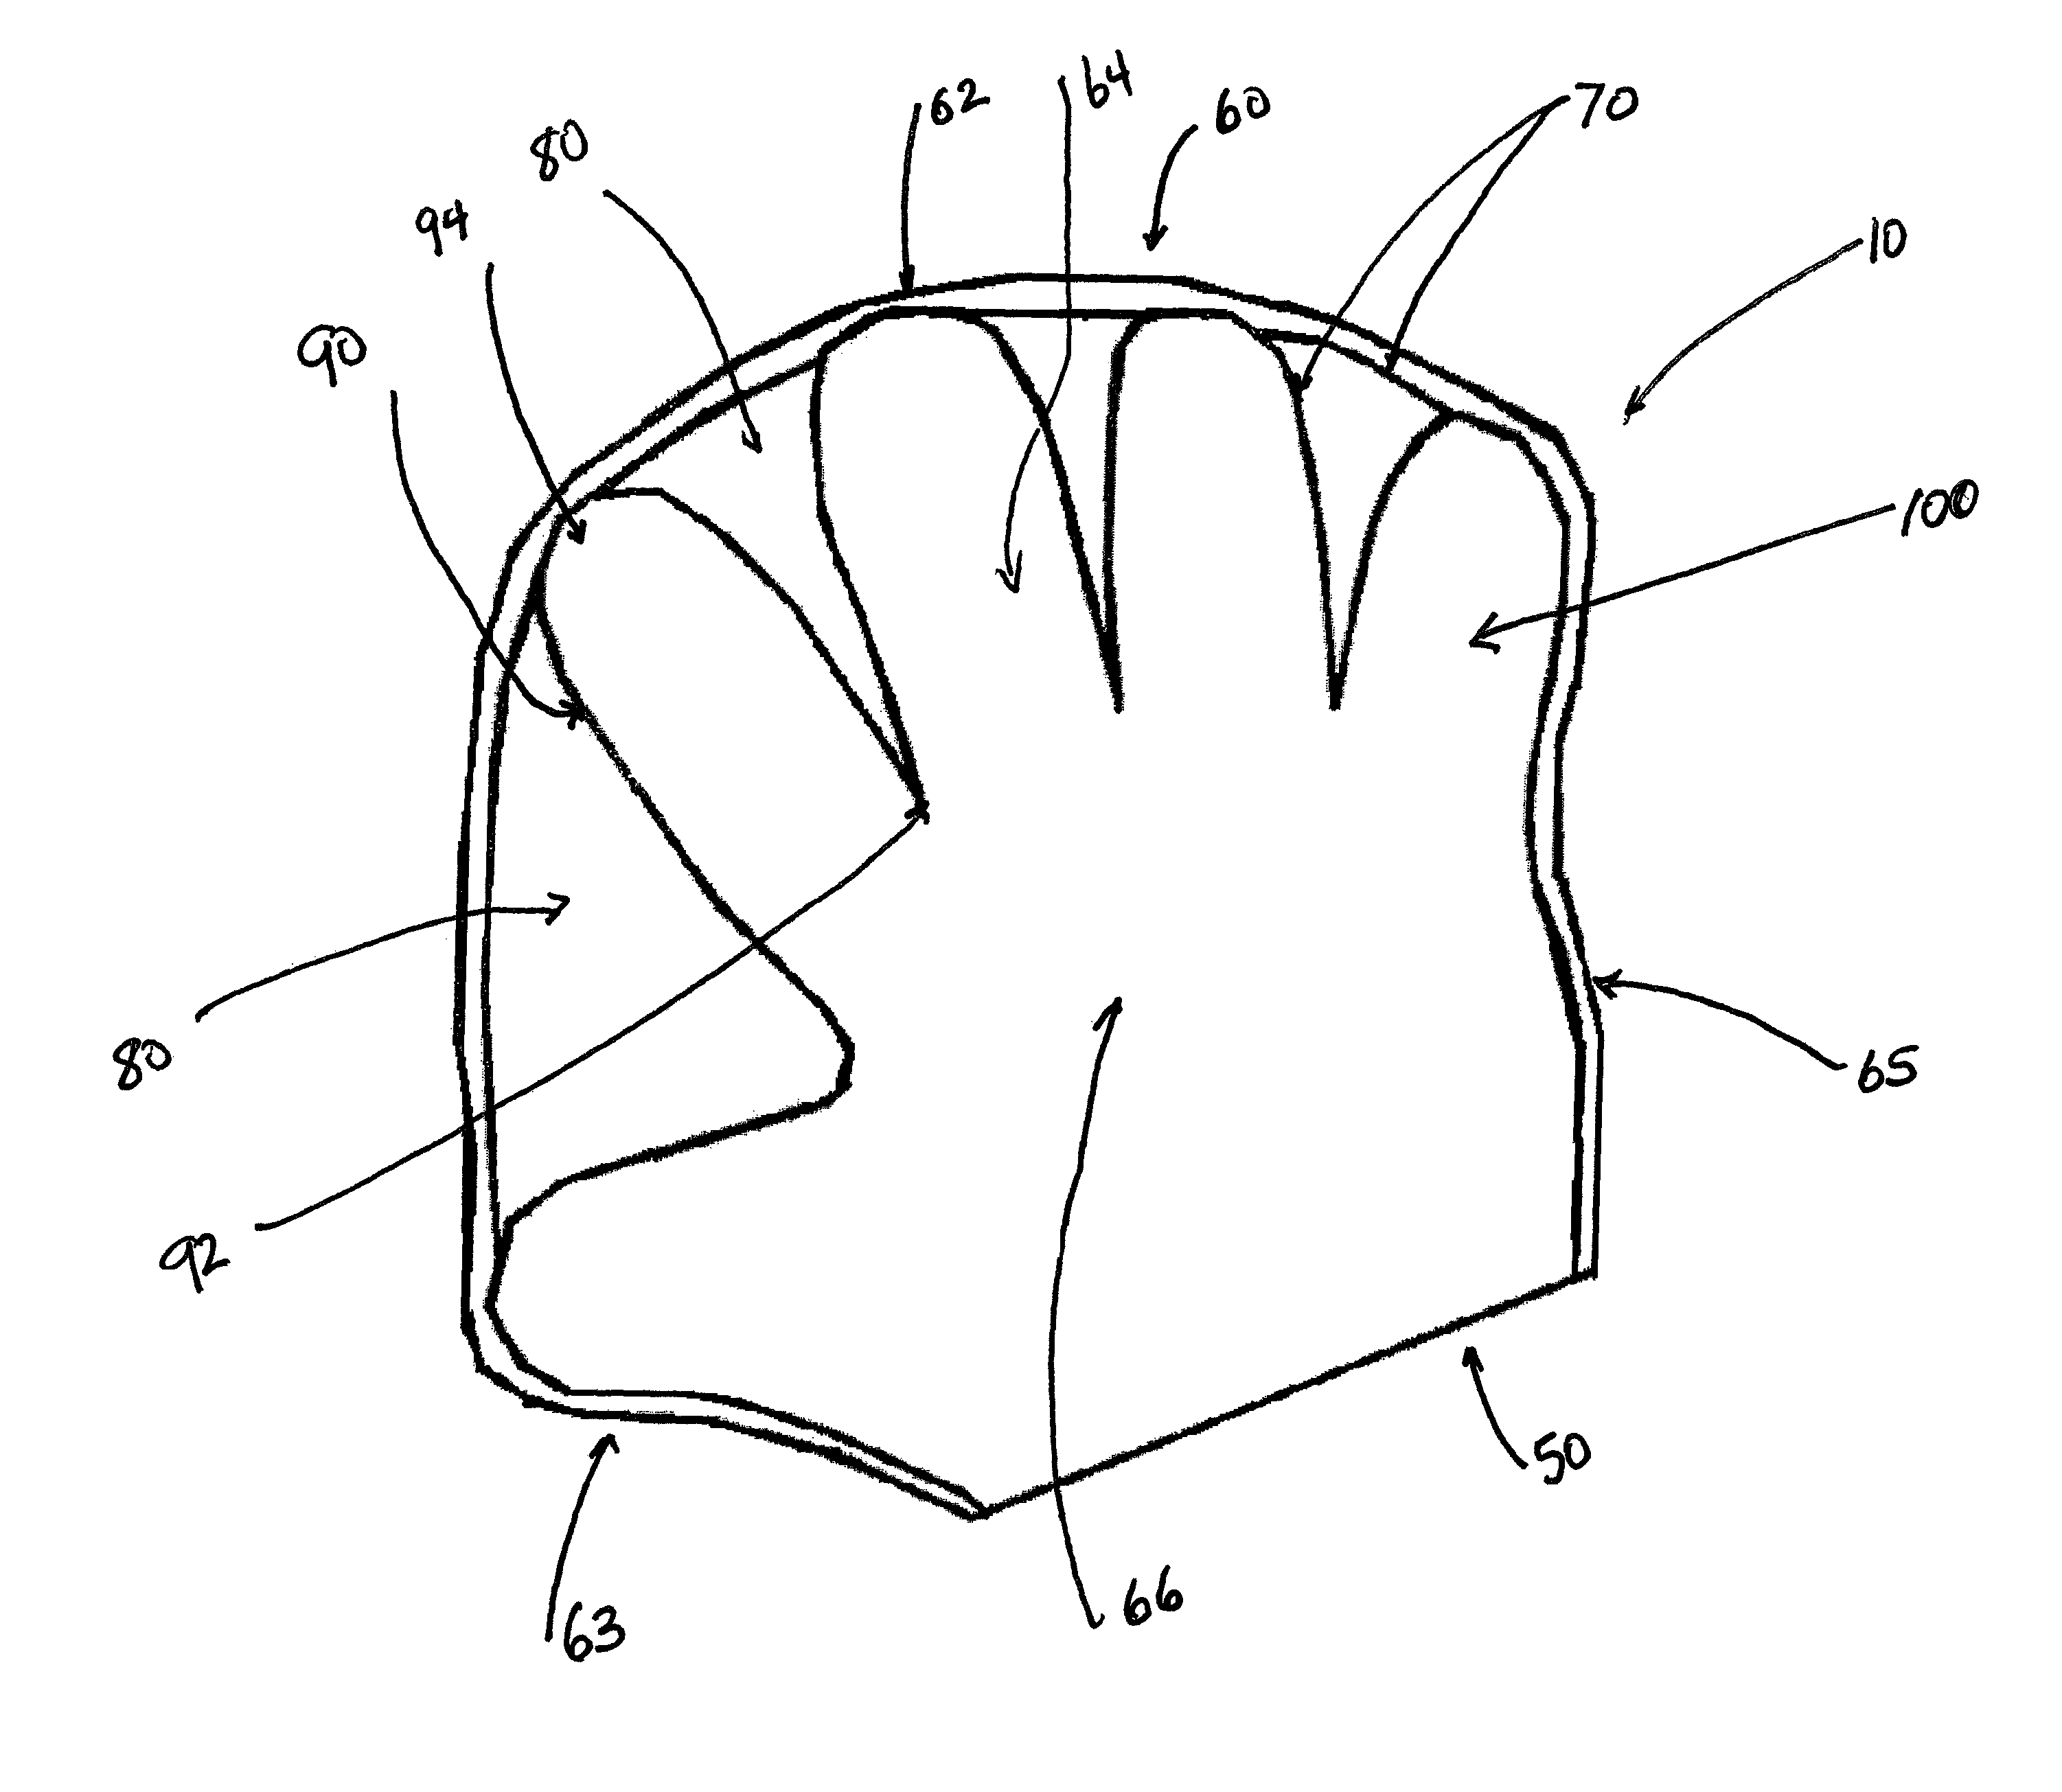 Reusable cleaning hybrid web glove